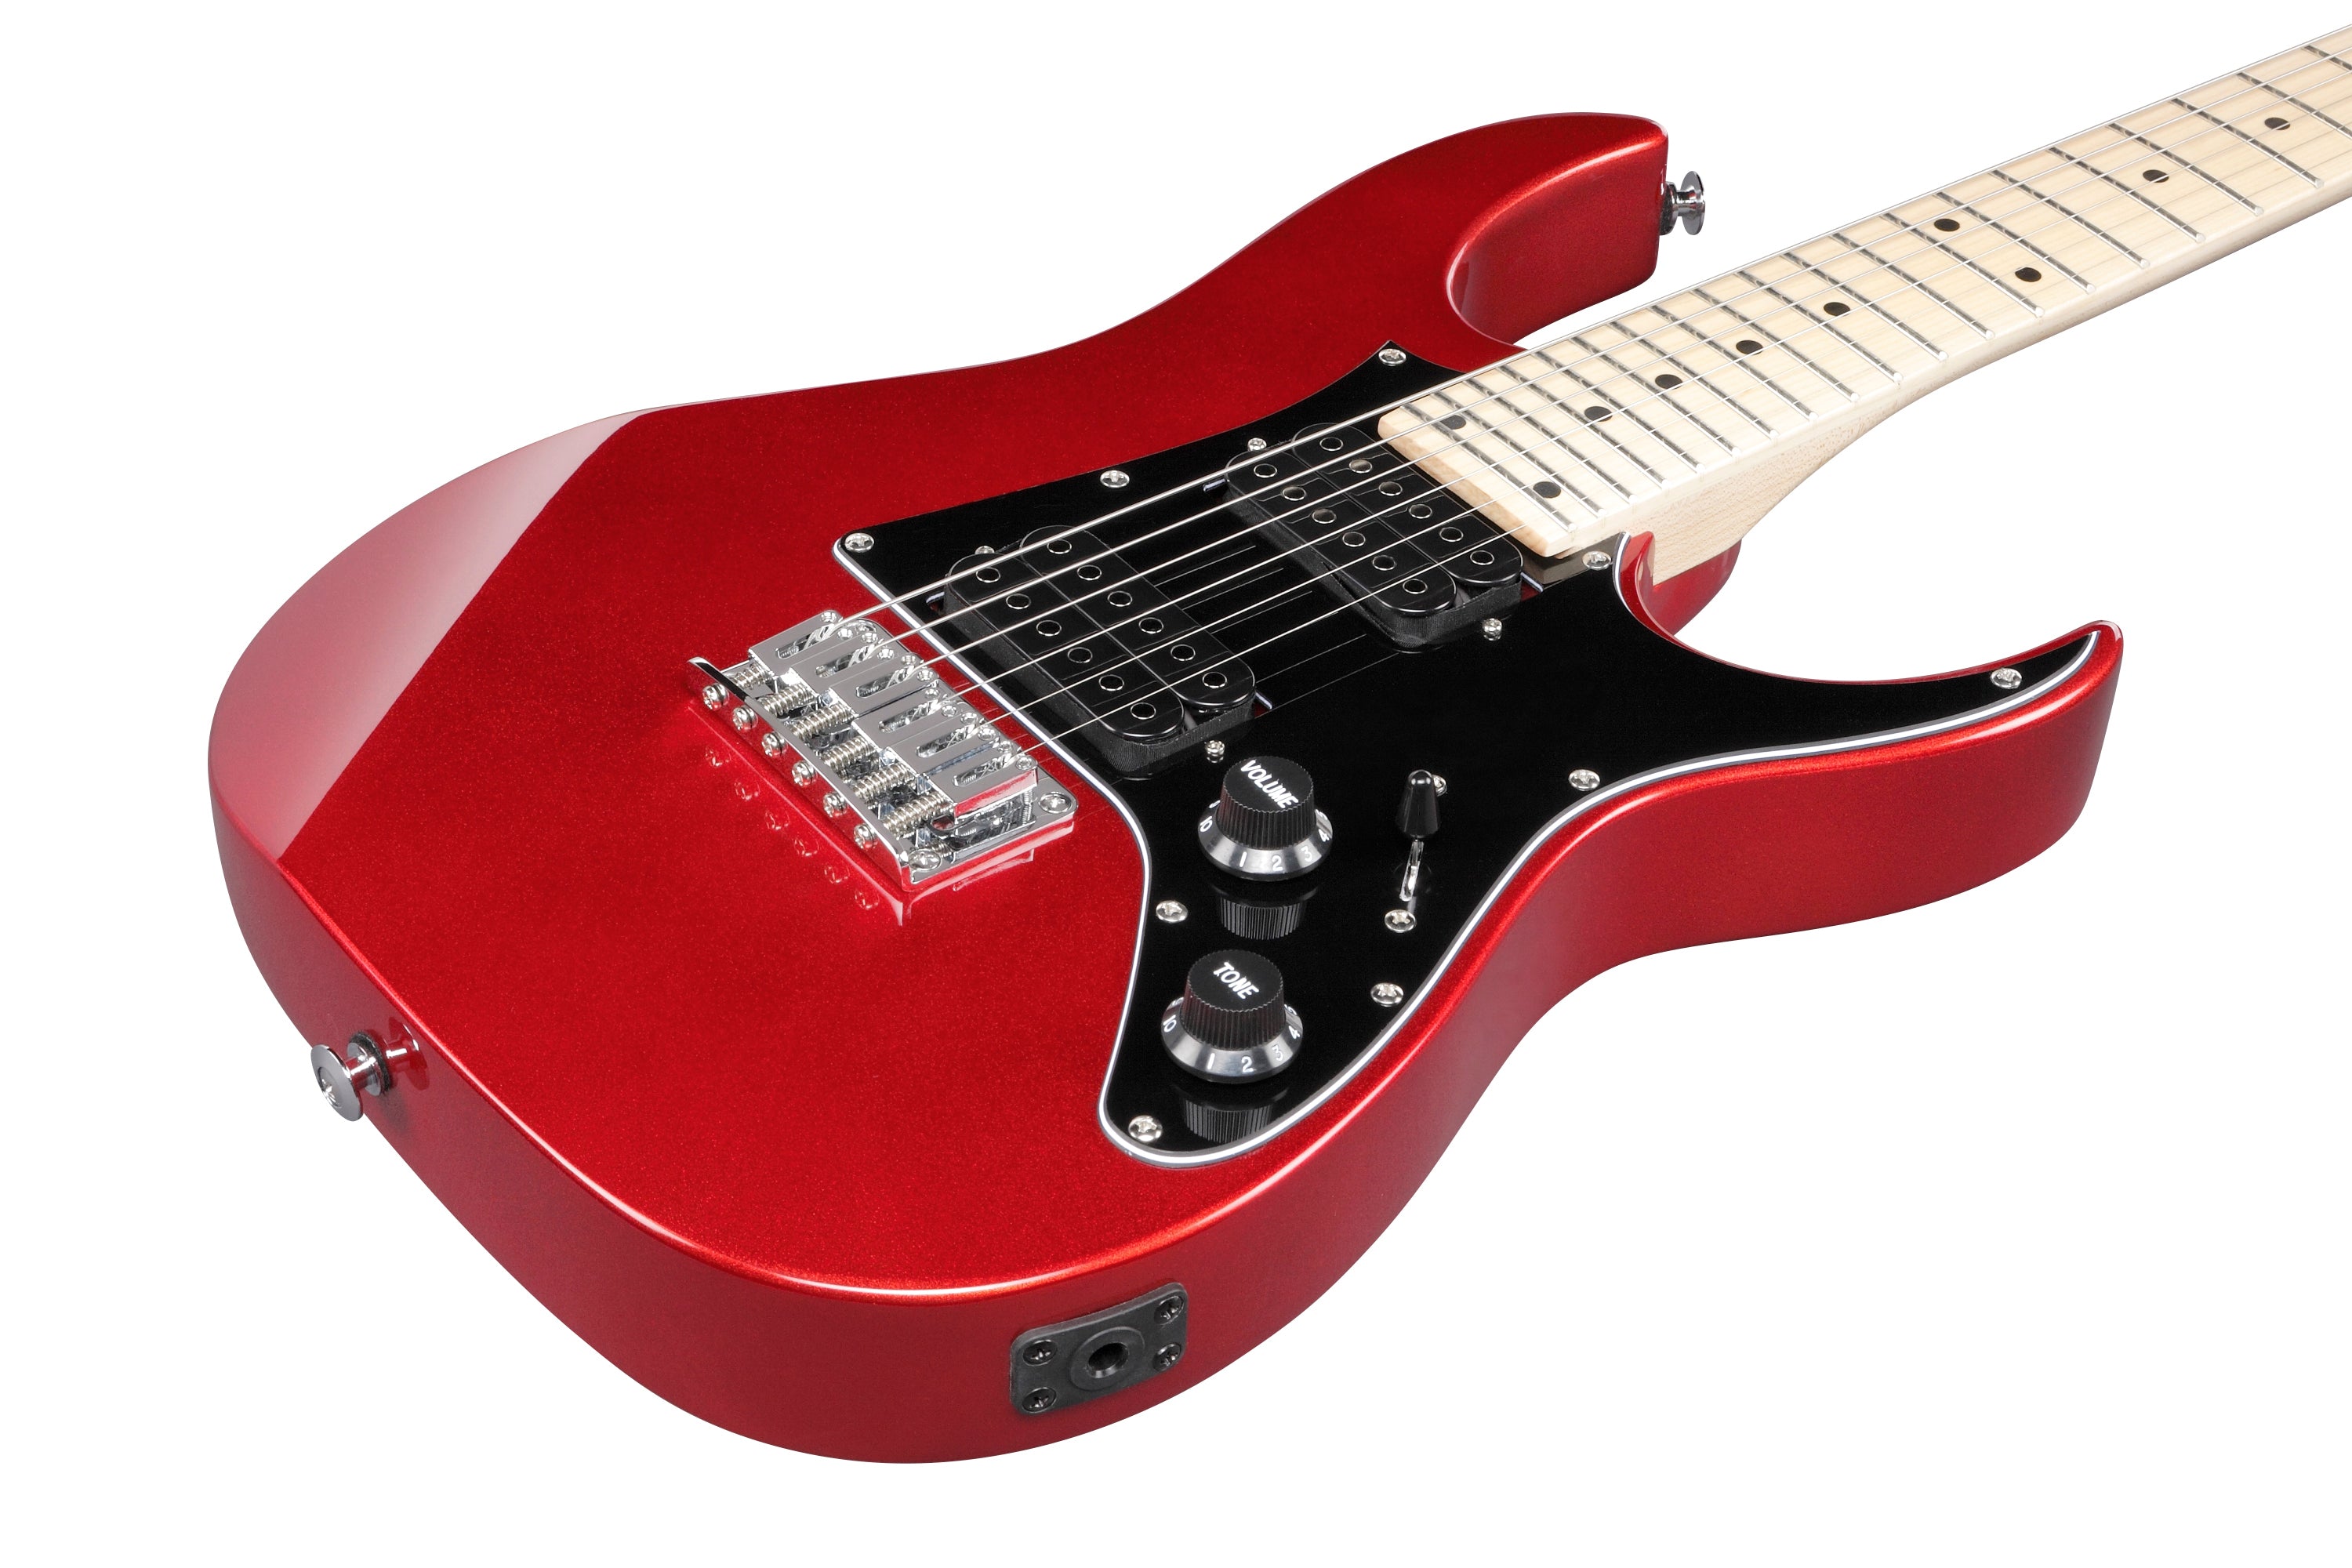 Ibanez GRGM21 Miko Electric Guitar (Candy Apple)